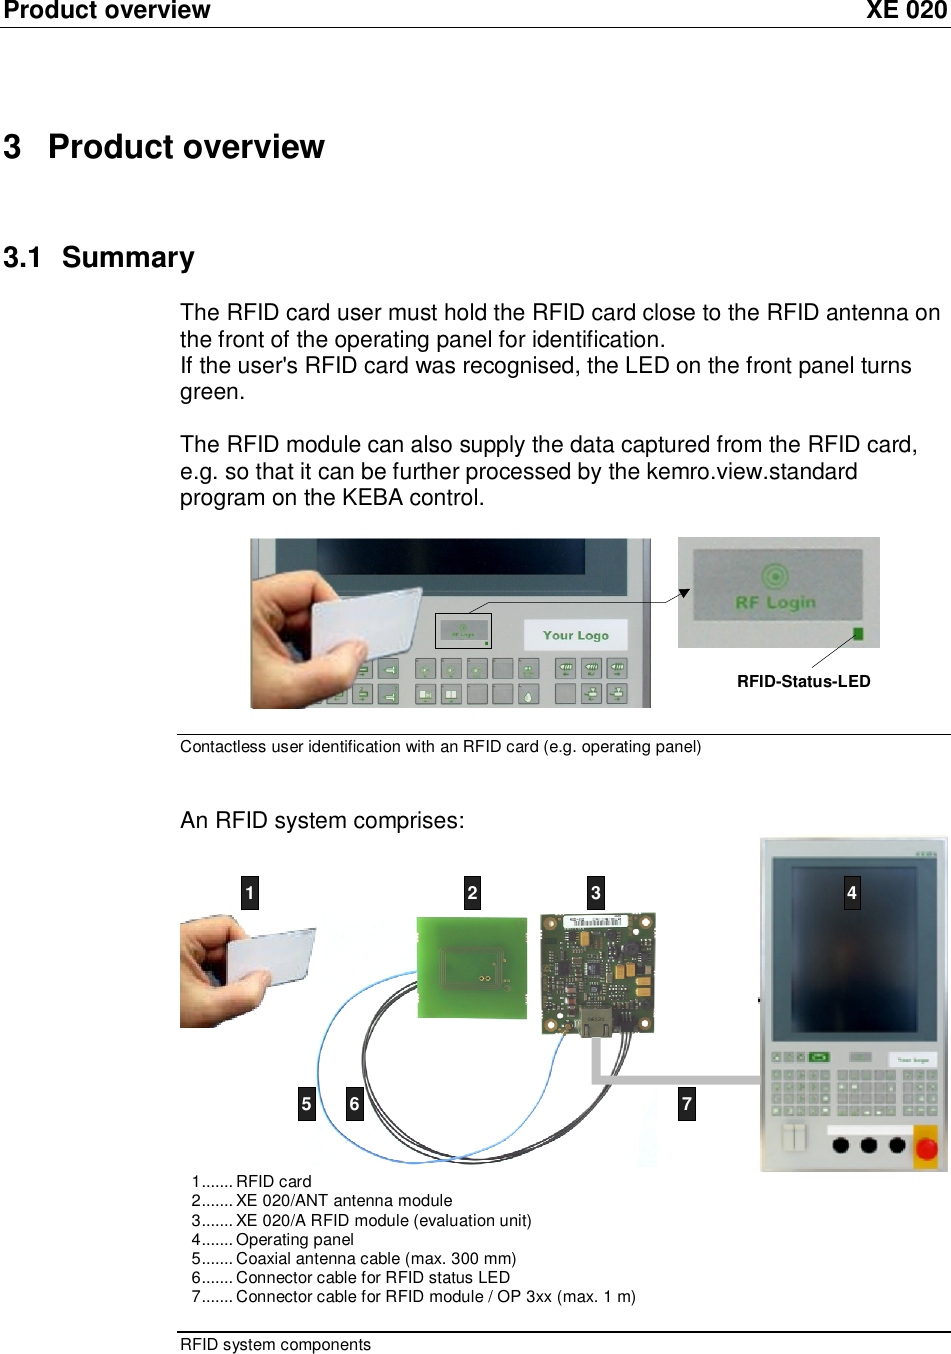 Product overview XE 020 3 Product overview 3.1 Summary The RFID card user must hold the RFID card close to the RFID antenna on the front of the operating panel for identification. If the user&apos;s RFID card was recognised, the LED on the front panel turns green.   The RFID module can also supply the data captured from the RFID card, e.g. so that it can be further processed by the kemro.view.standard program on the KEBA control.  RFID-Status-LED  Contactless user identification with an RFID card (e.g. operating panel)  An RFID system comprises:  5671234567 1.......RFID card 2.......XE 020/ANT antenna module 3.......XE 020/A RFID module (evaluation unit) 4.......Operating panel 5.......Coaxial antenna cable (max. 300 mm) 6.......Connector cable for RFID status LED 7.......Connector cable for RFID module / OP 3xx (max. 1 m) RFID system components 